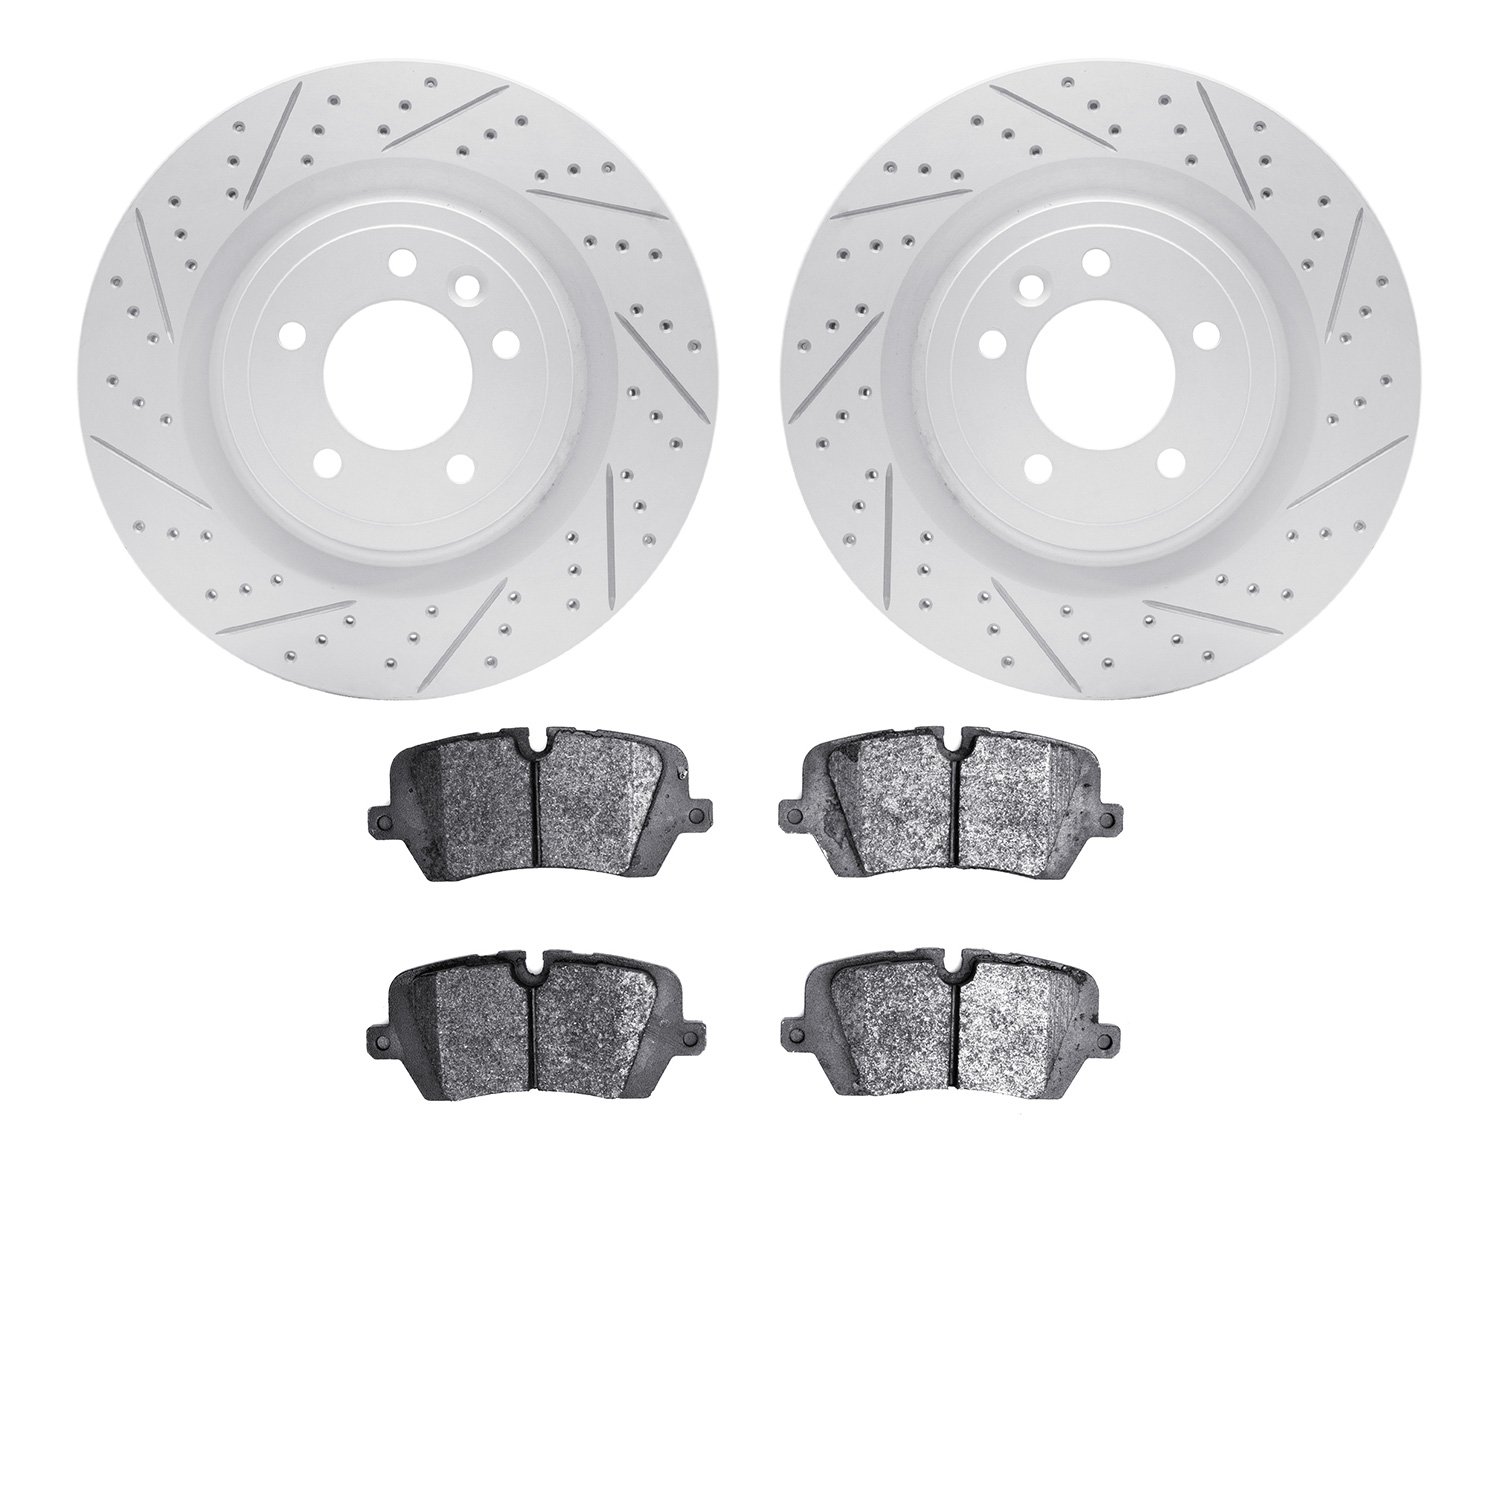 2502-11033 Geoperformance Drilled/Slotted Rotors w/5000 Advanced Brake Pads Kit, Fits Select Land Rover, Position: Rear